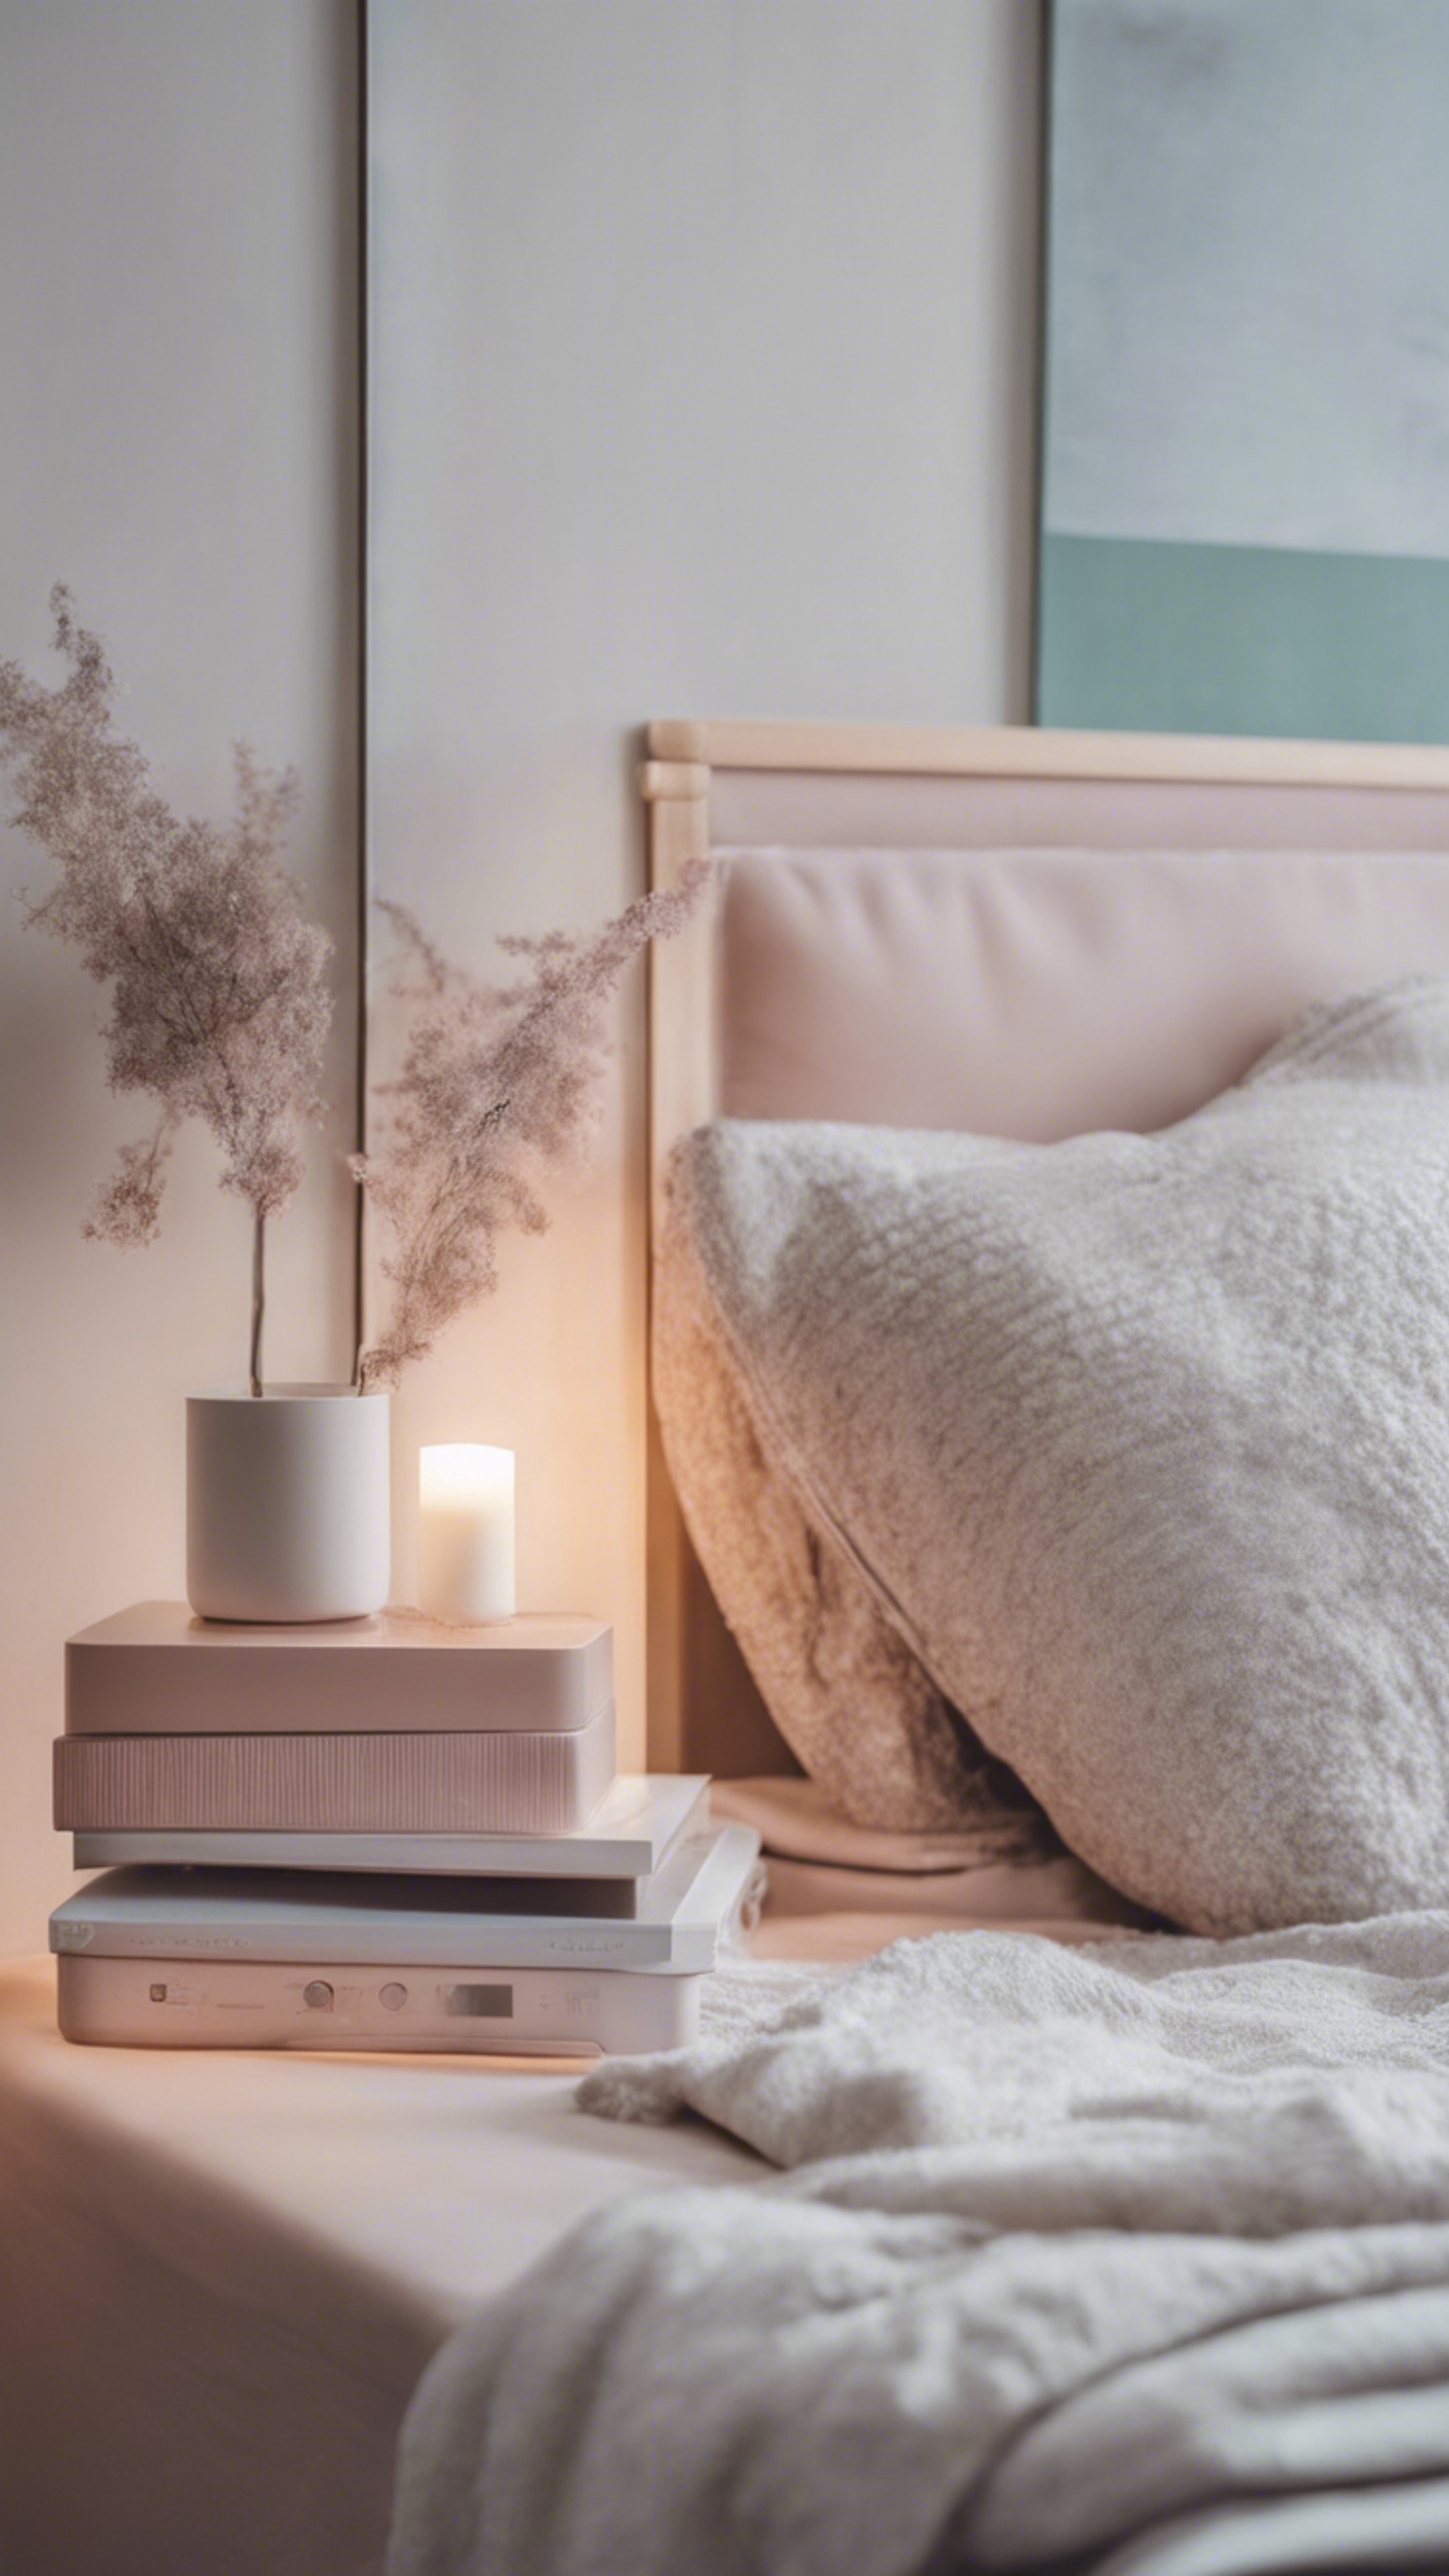 A modern minimalist bedroom in pastel hues with cozy blankets and a stylish bedside table. Tapetai[e12df14007a0419d89d8]